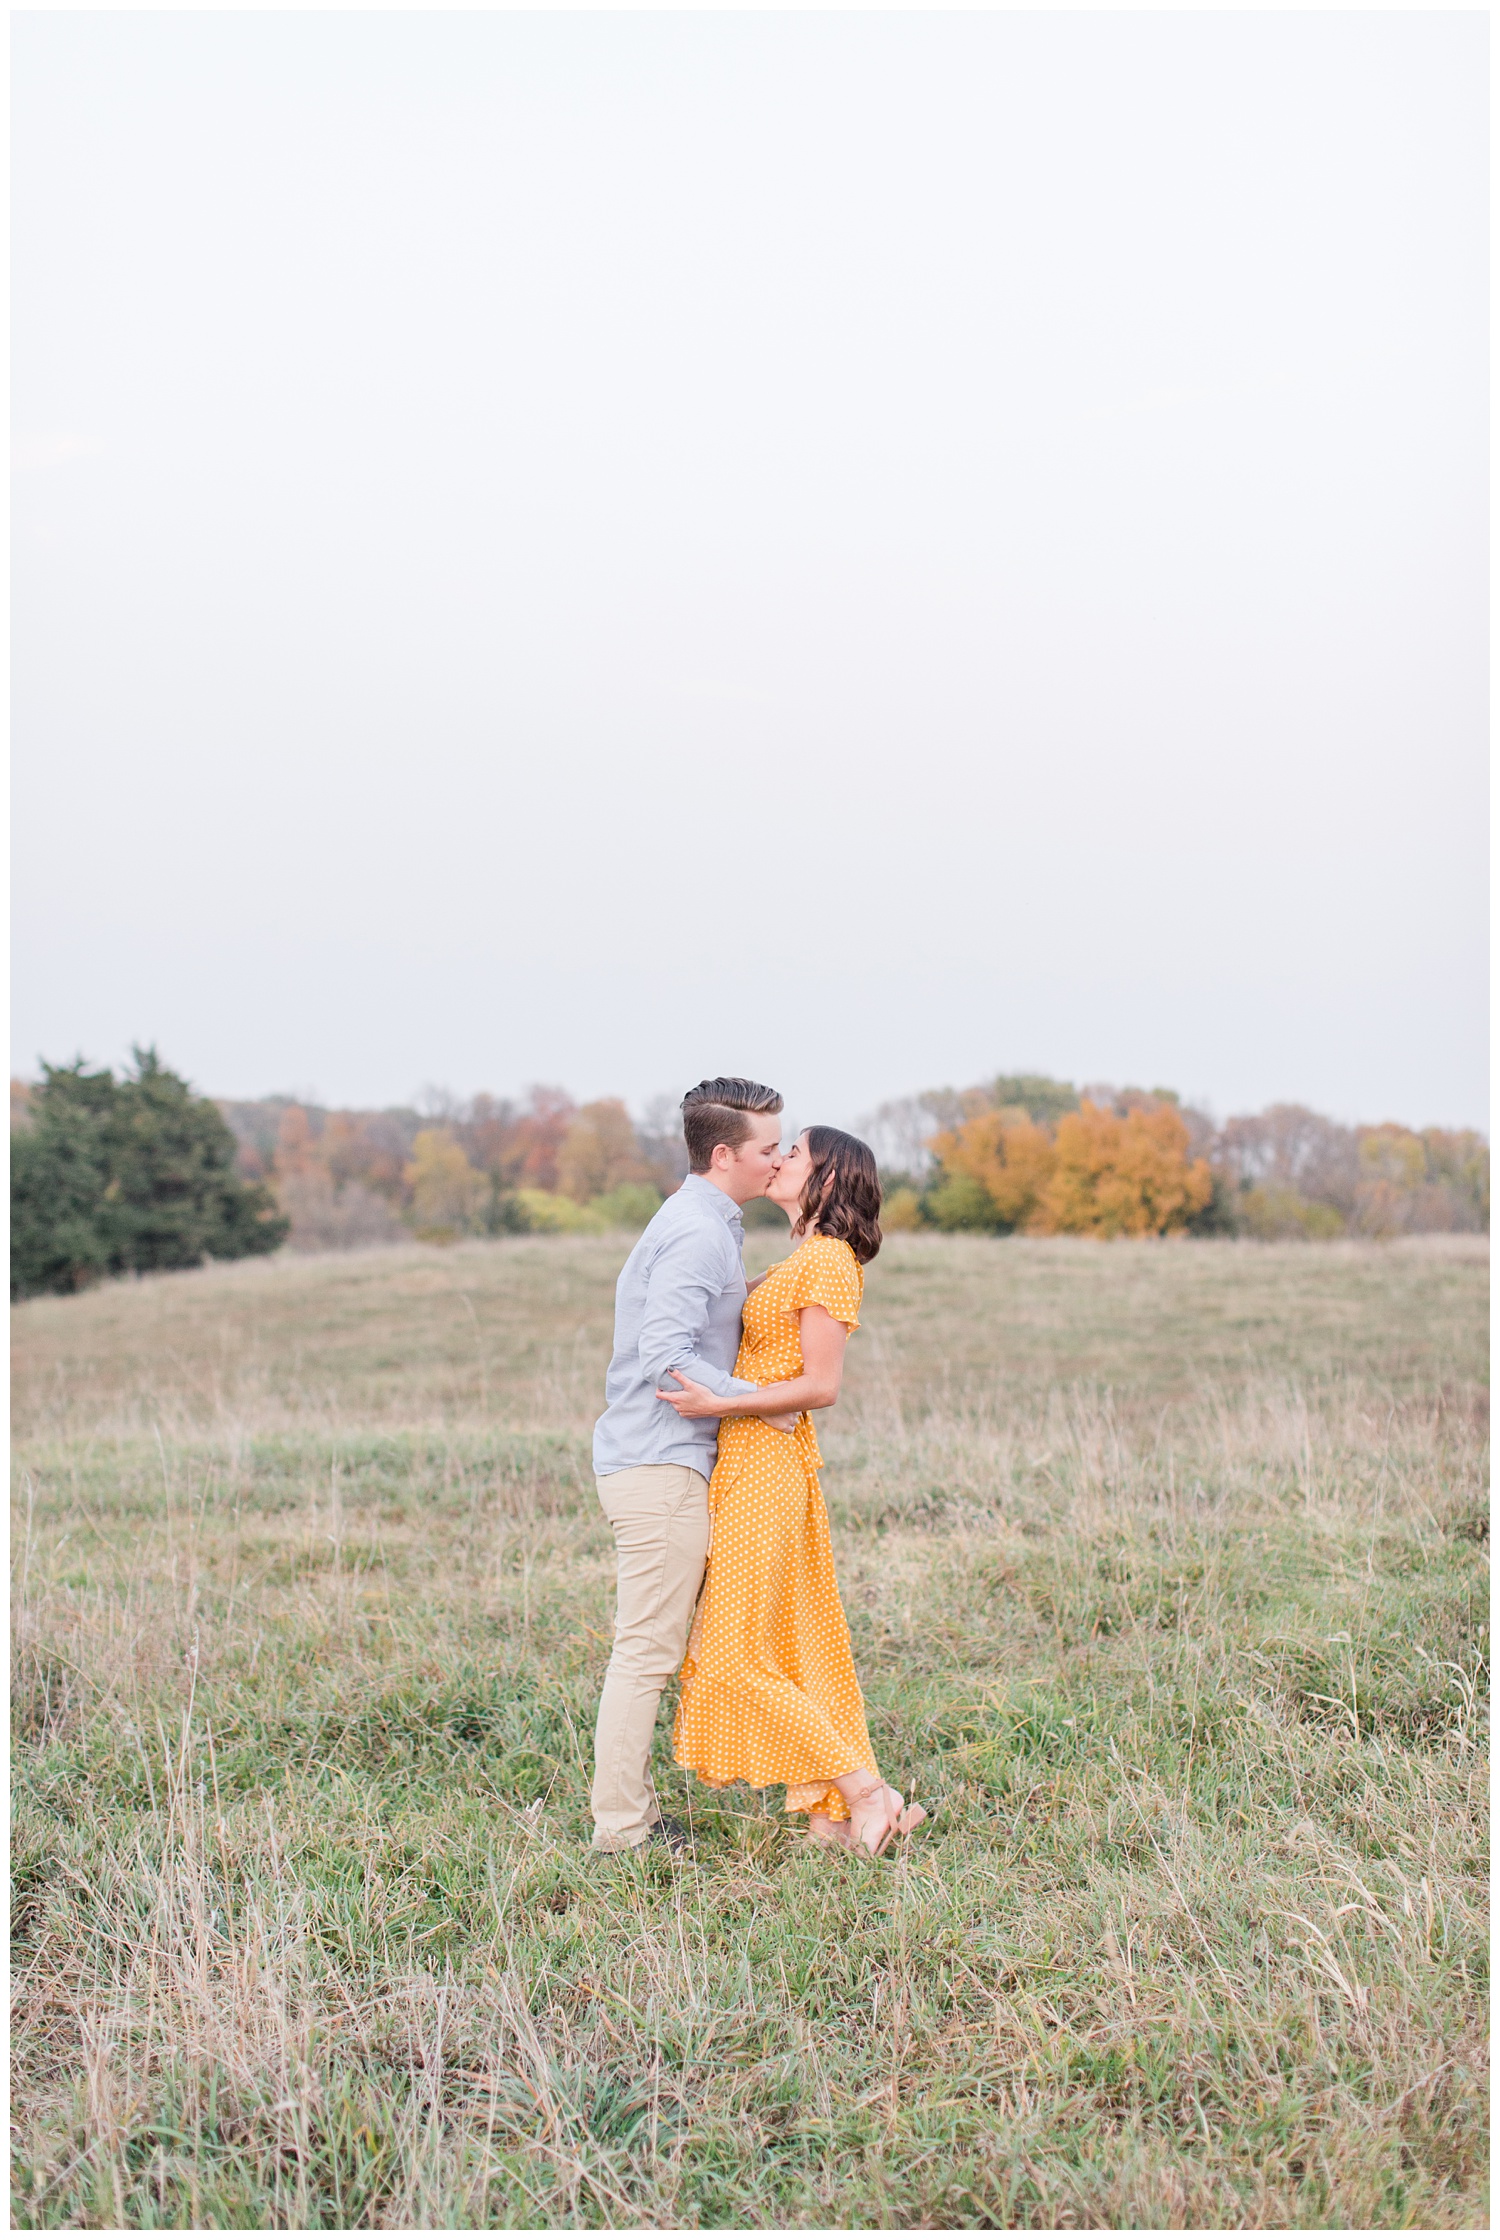 Jadi wearing a yellow flowing dress kisses Luke while embracing together in a grassy field in Iowa during the fall for engagement photos | CB Studio